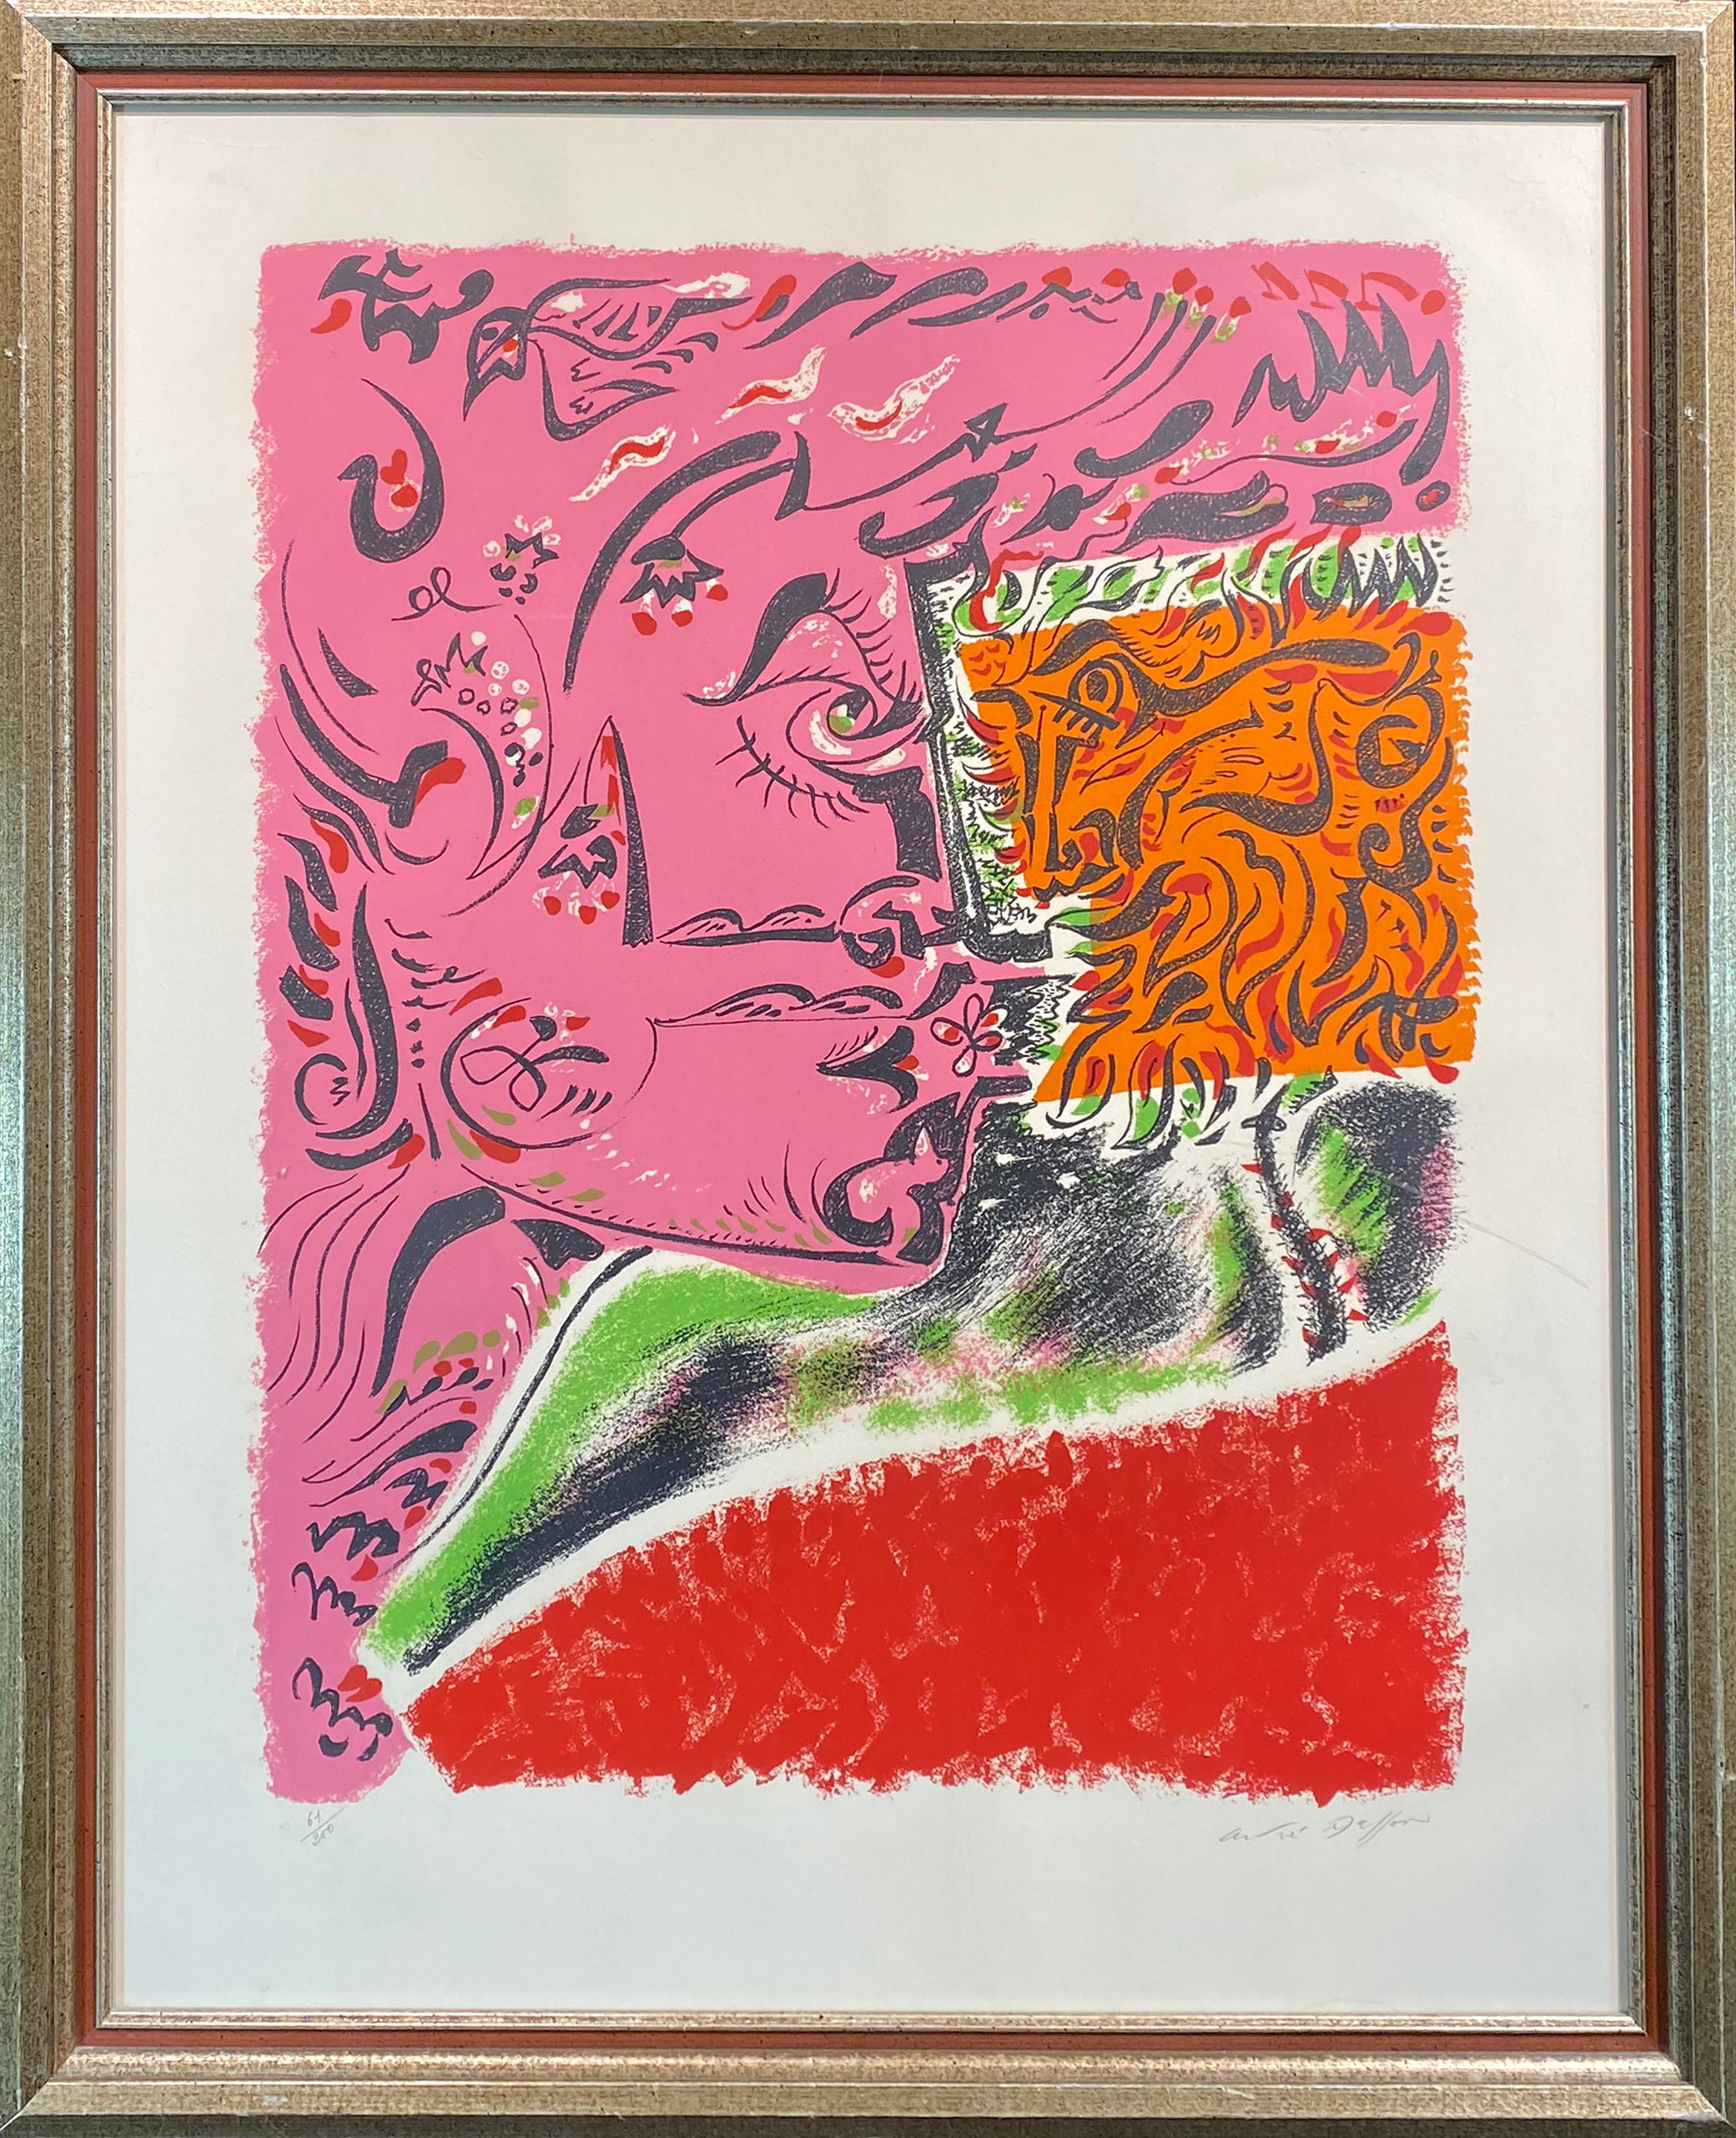 Profil Rose - Print by André Masson